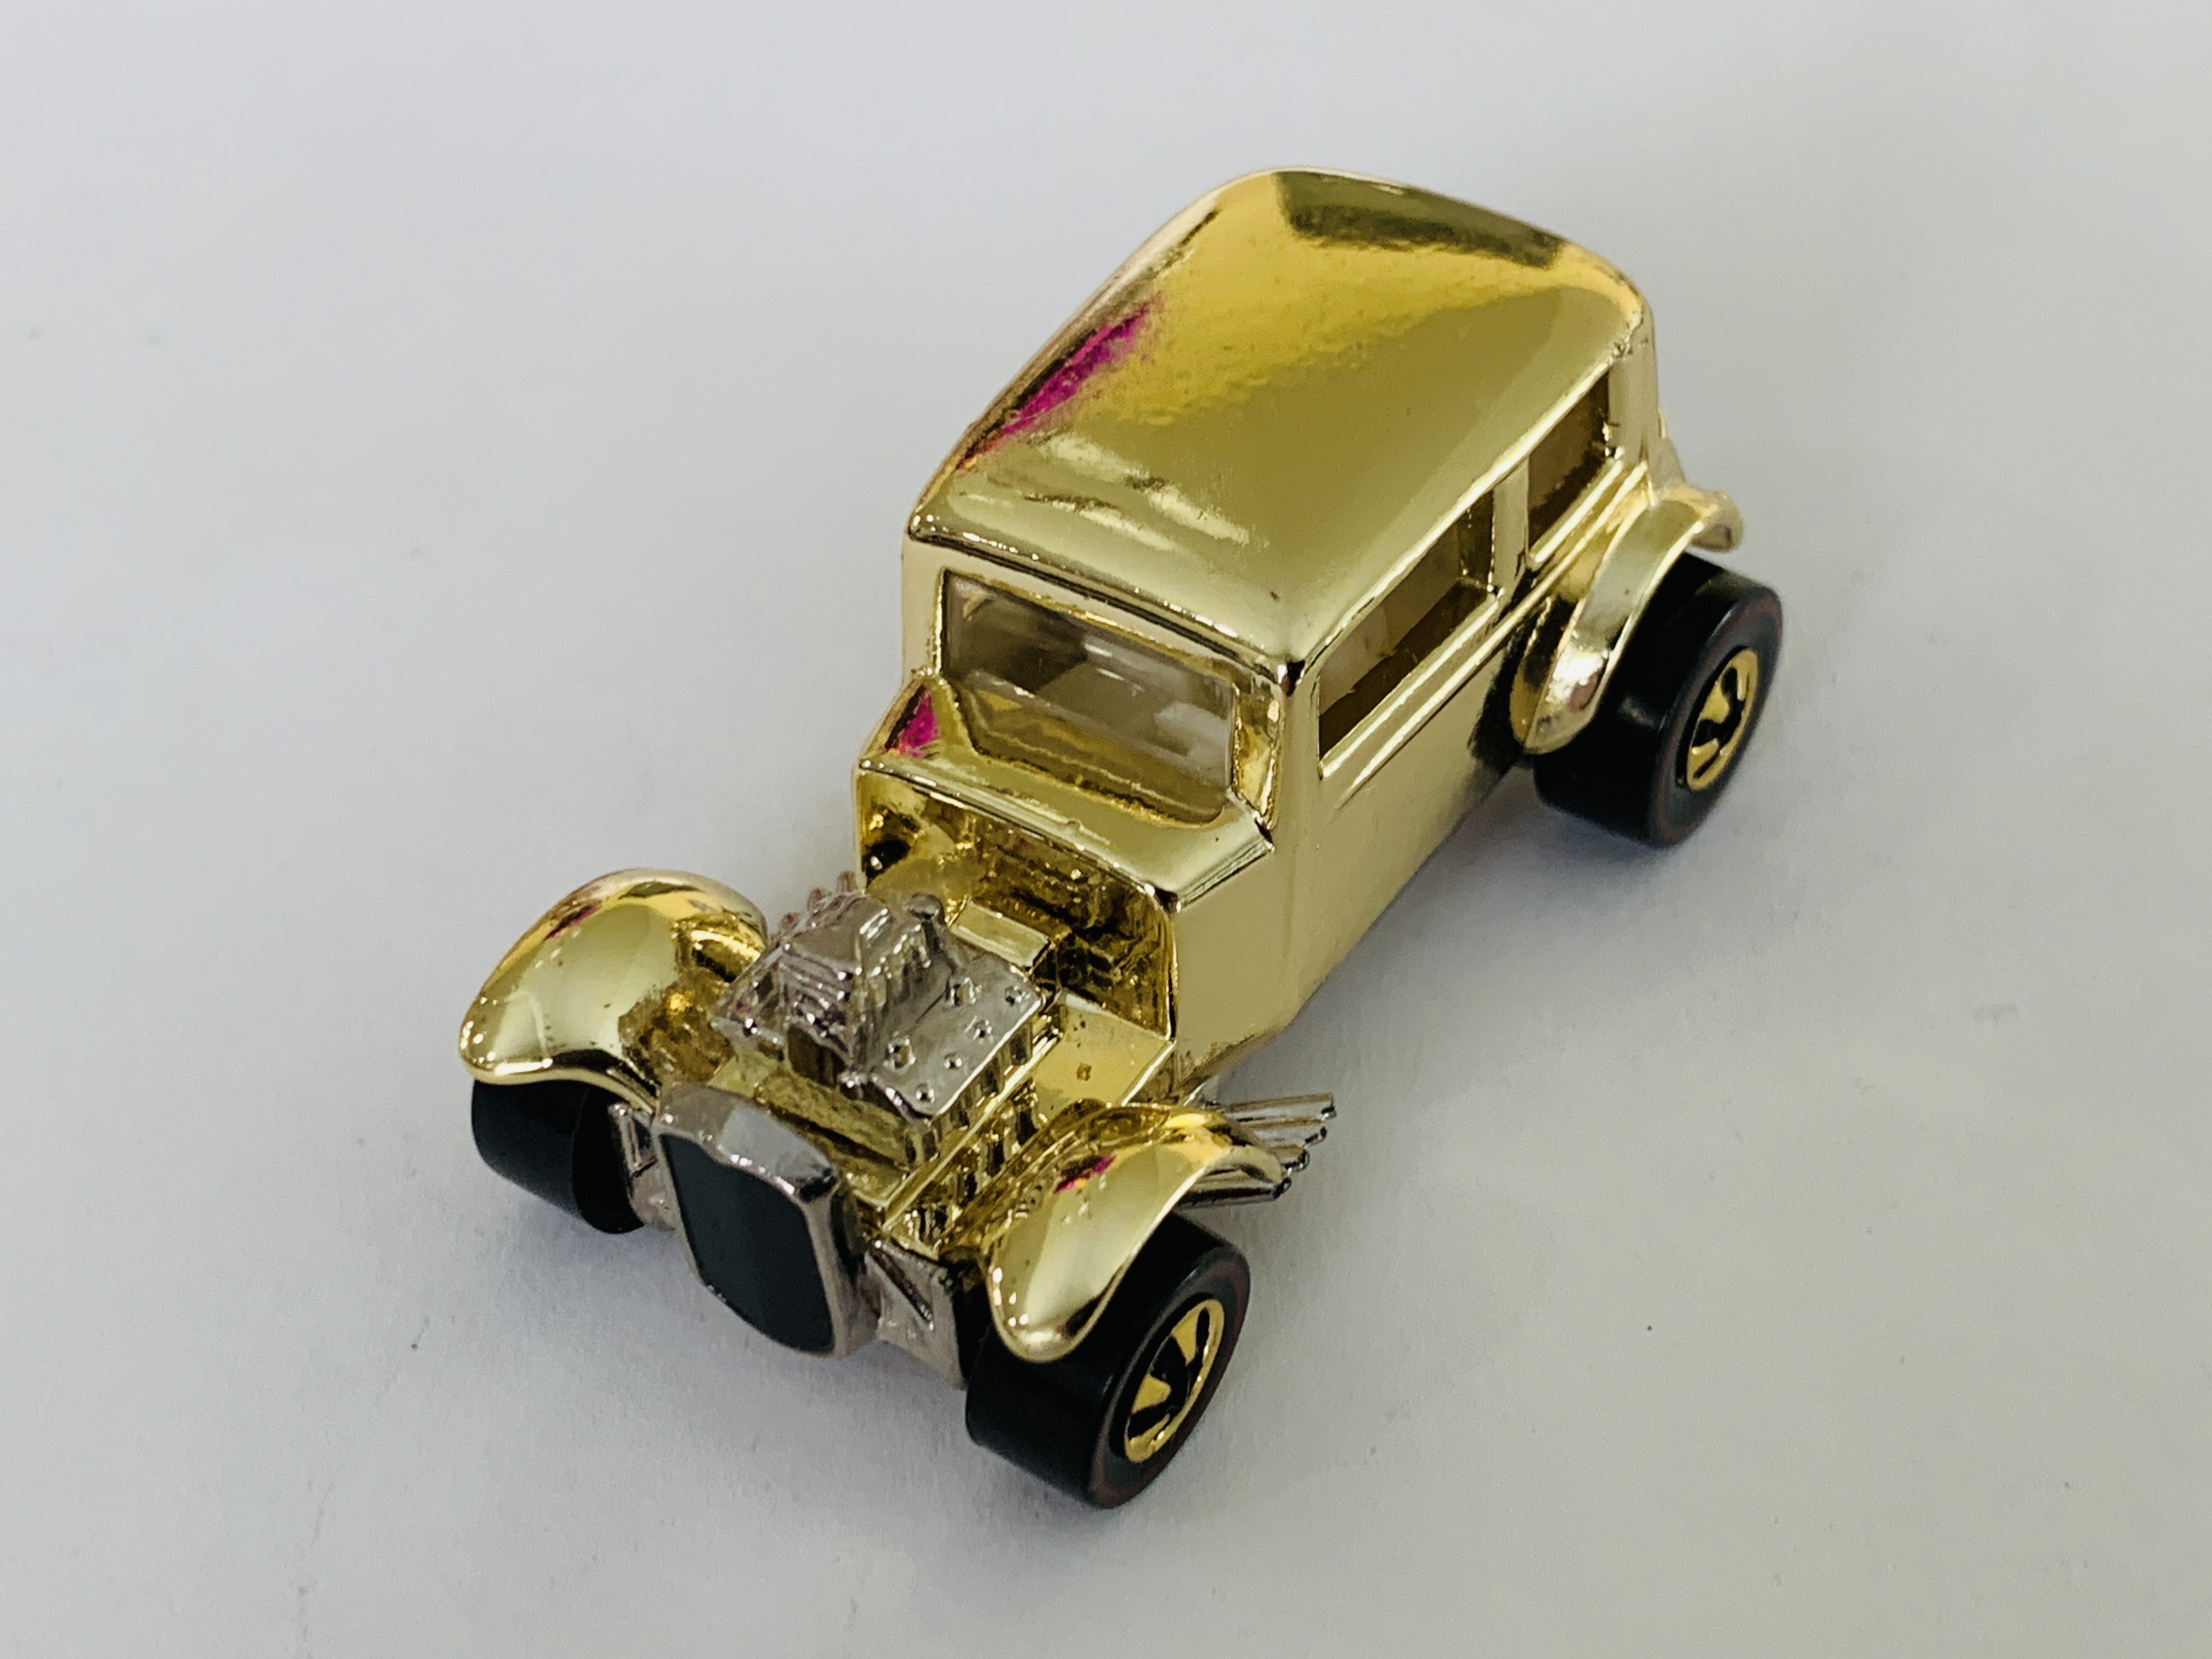 Hot Wheels FAO Schwarz Gold Series '32 Ford Vicky